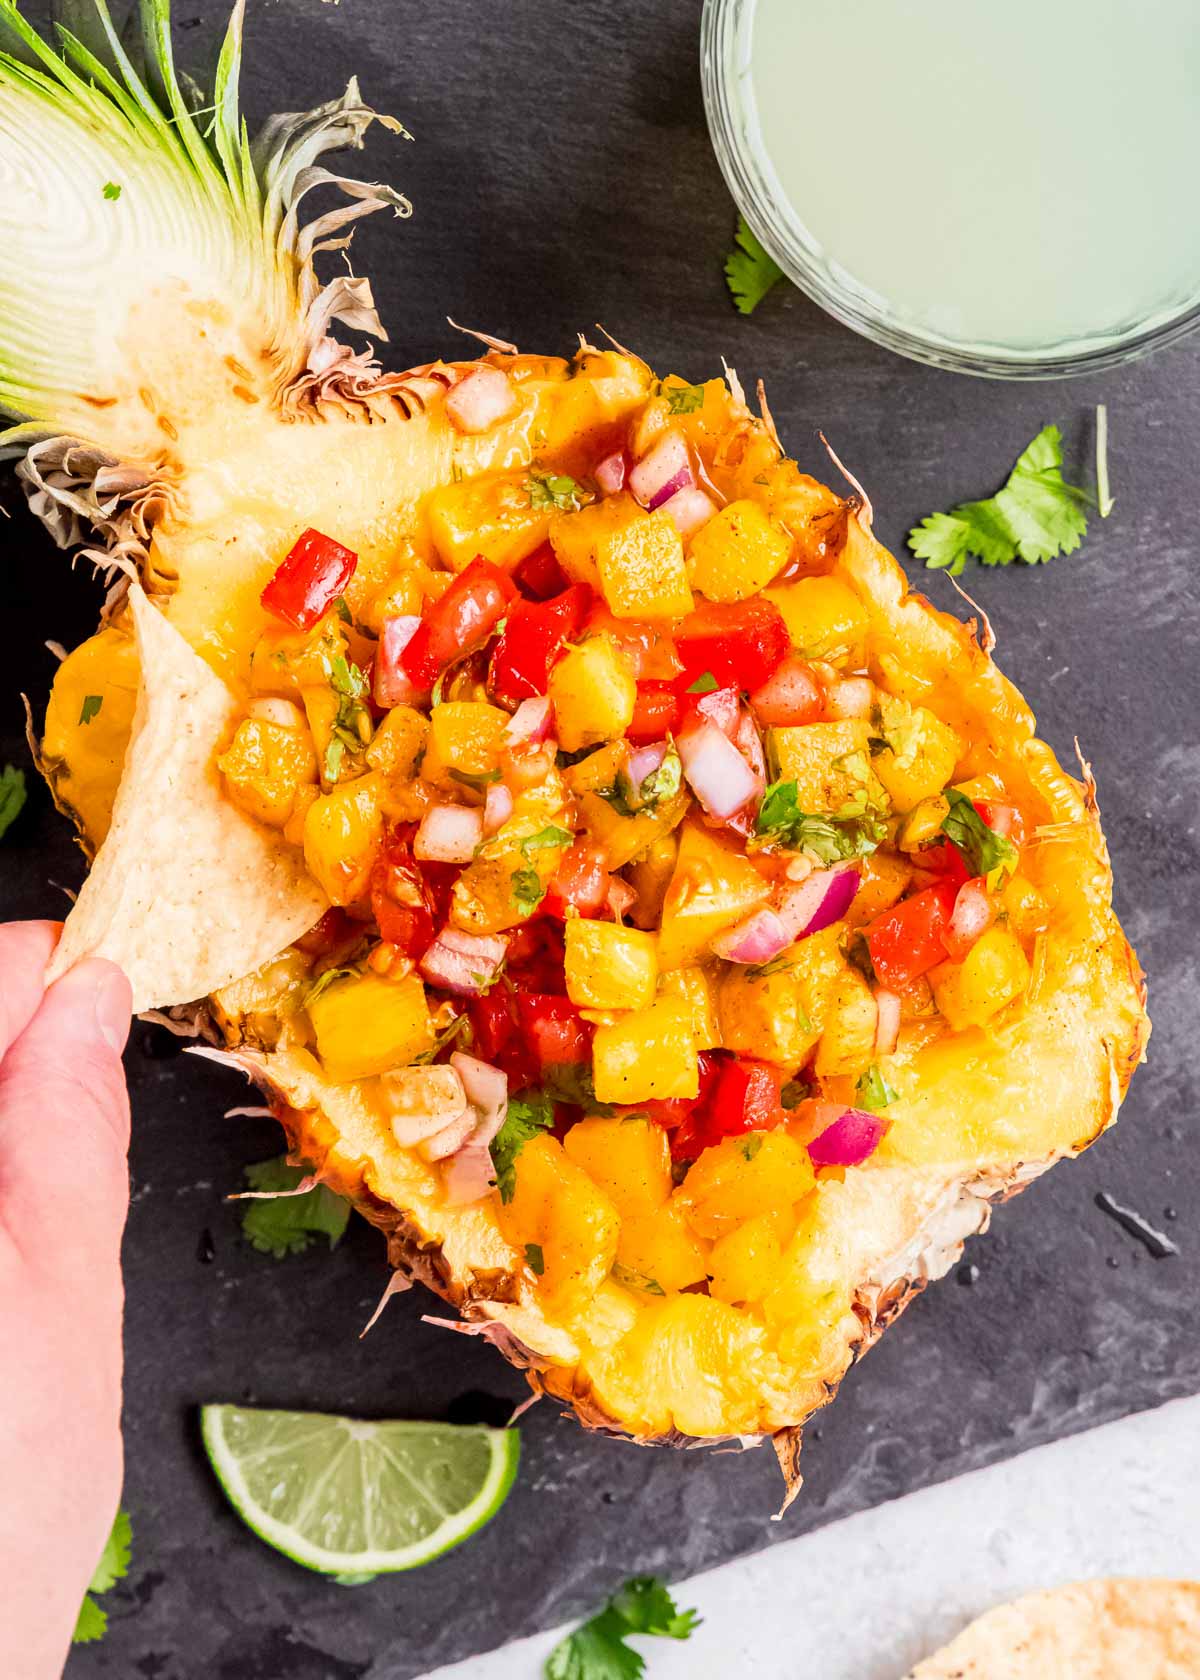 pineapple filled with grilled pineapple salsa; hand dipping a chip into the salsa